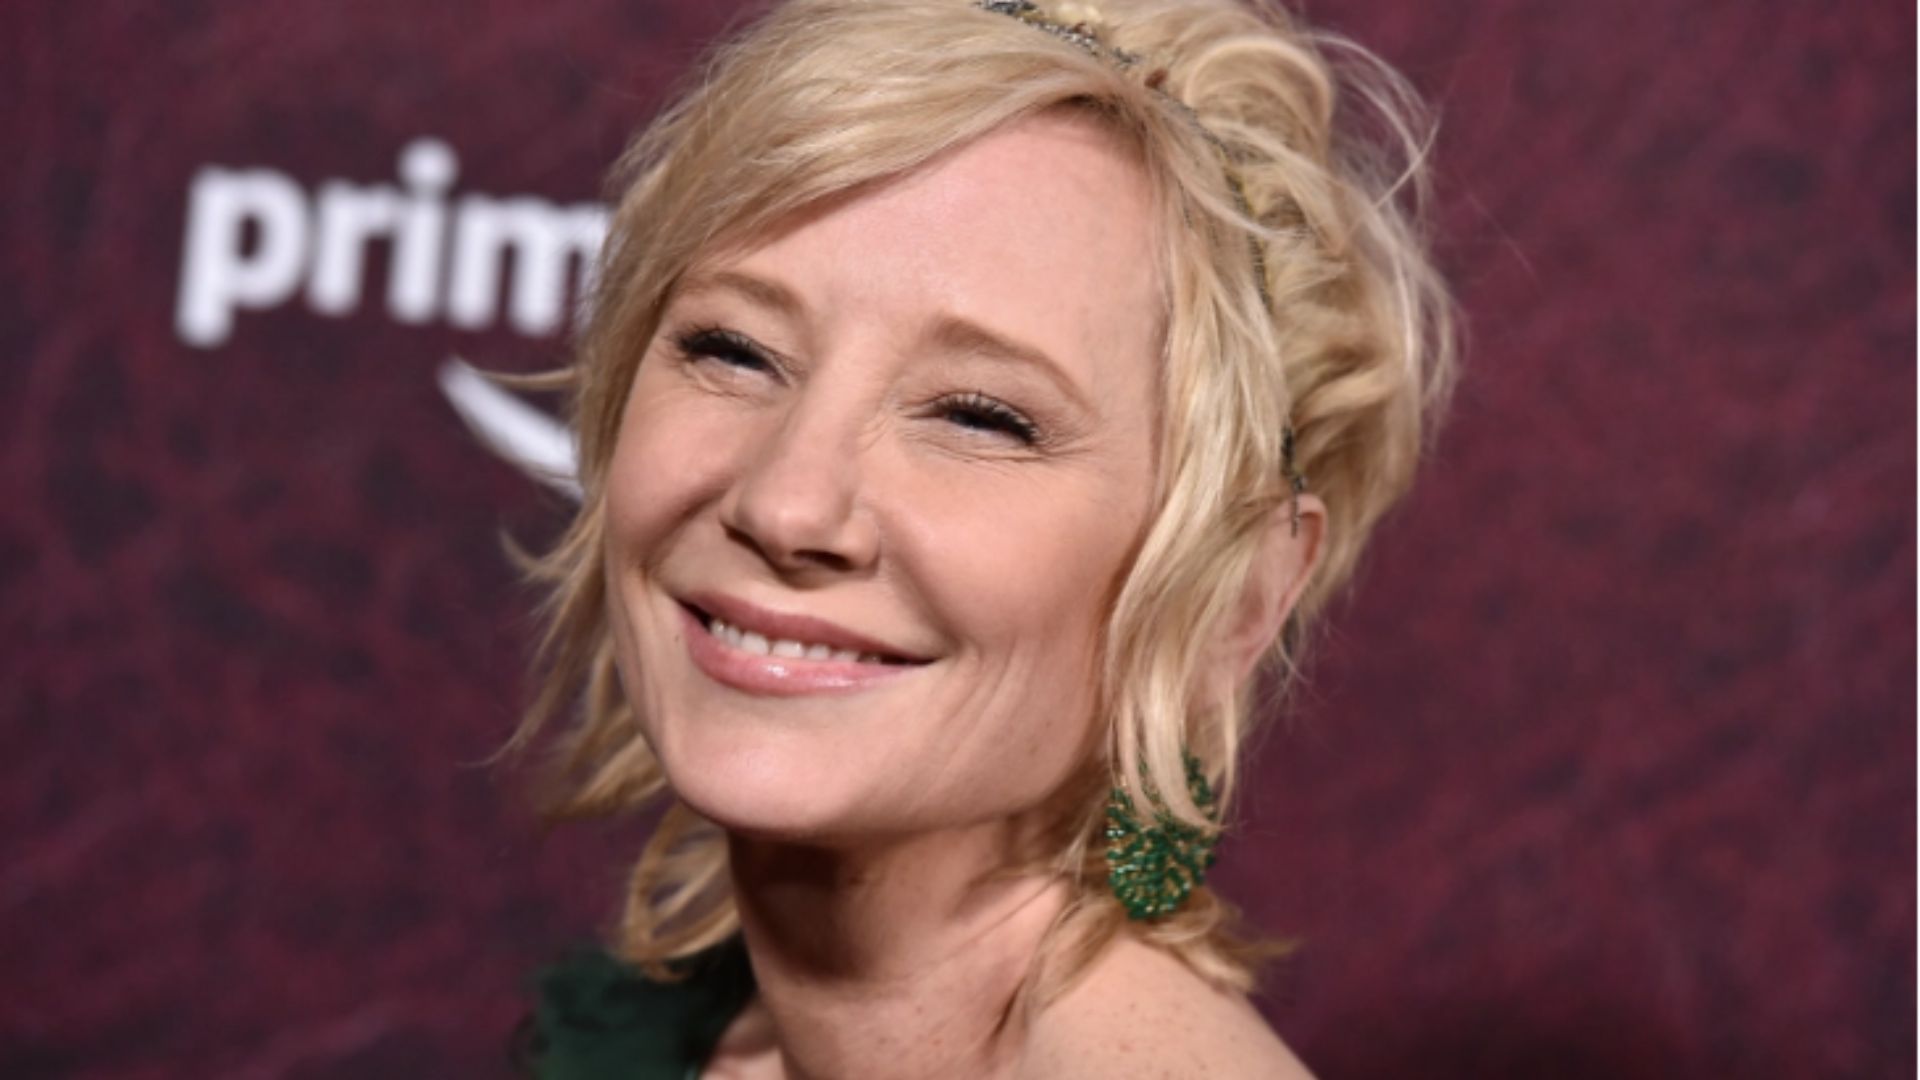 Anne Heche did not hope to survive after the car crash